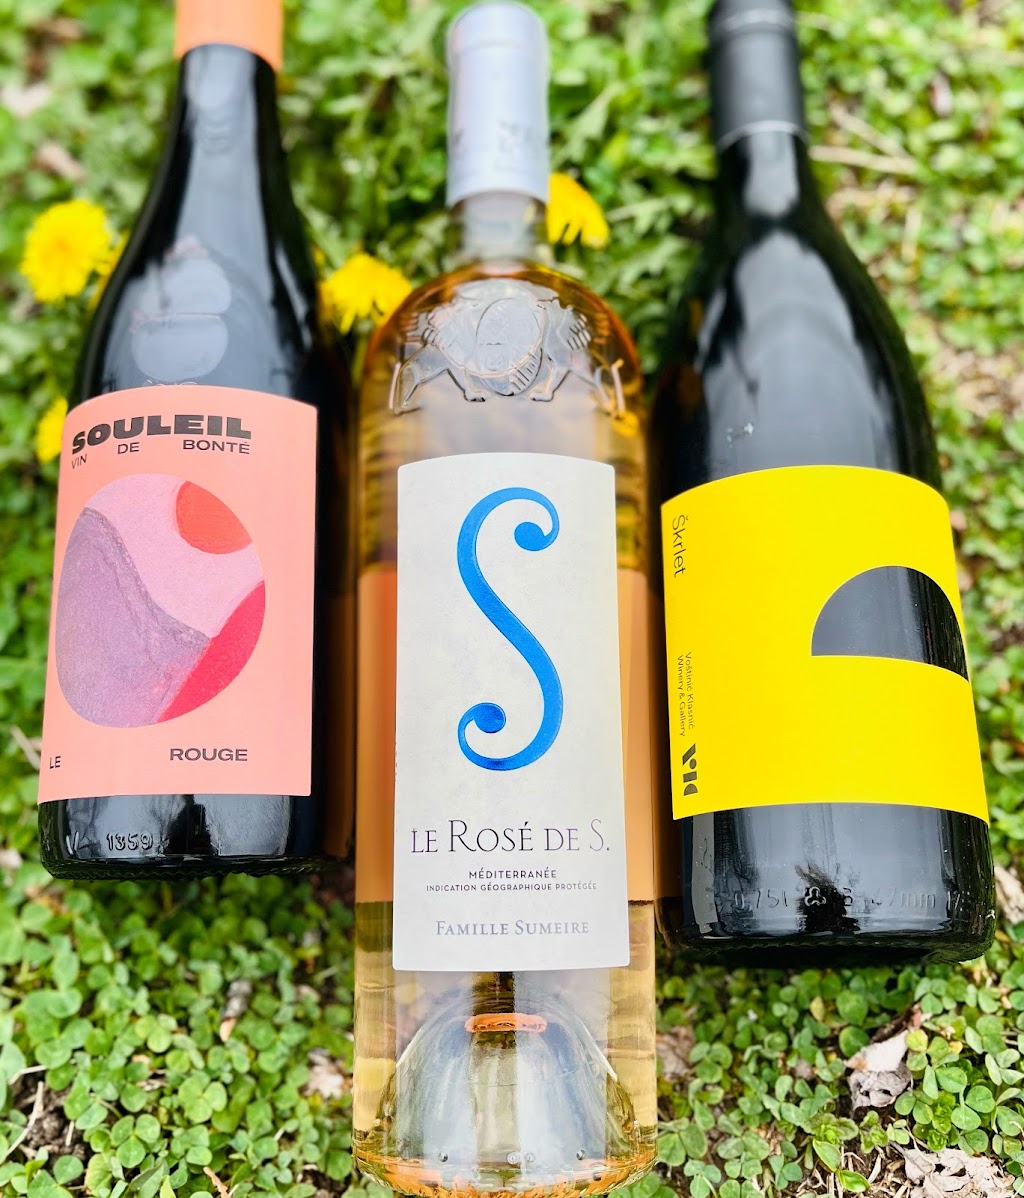 Connecticut River Wine & Spirits | 191 Middlesex Turnpike, Chester, CT 06412 | Phone: (860) 322-3381